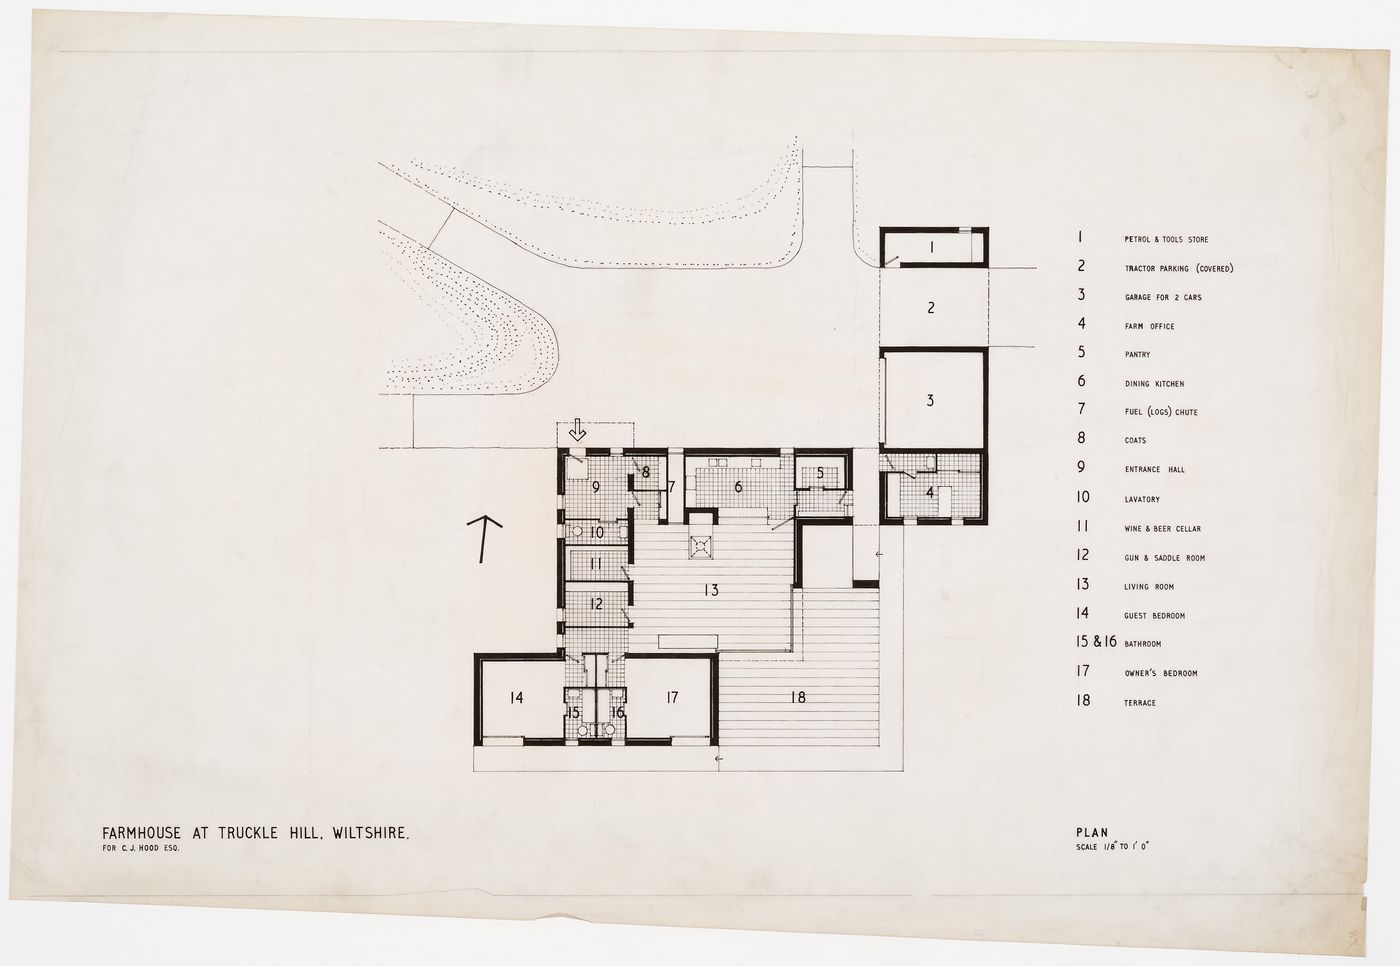 Plan for Farmhouse at Truckle Hill, Wiltshire